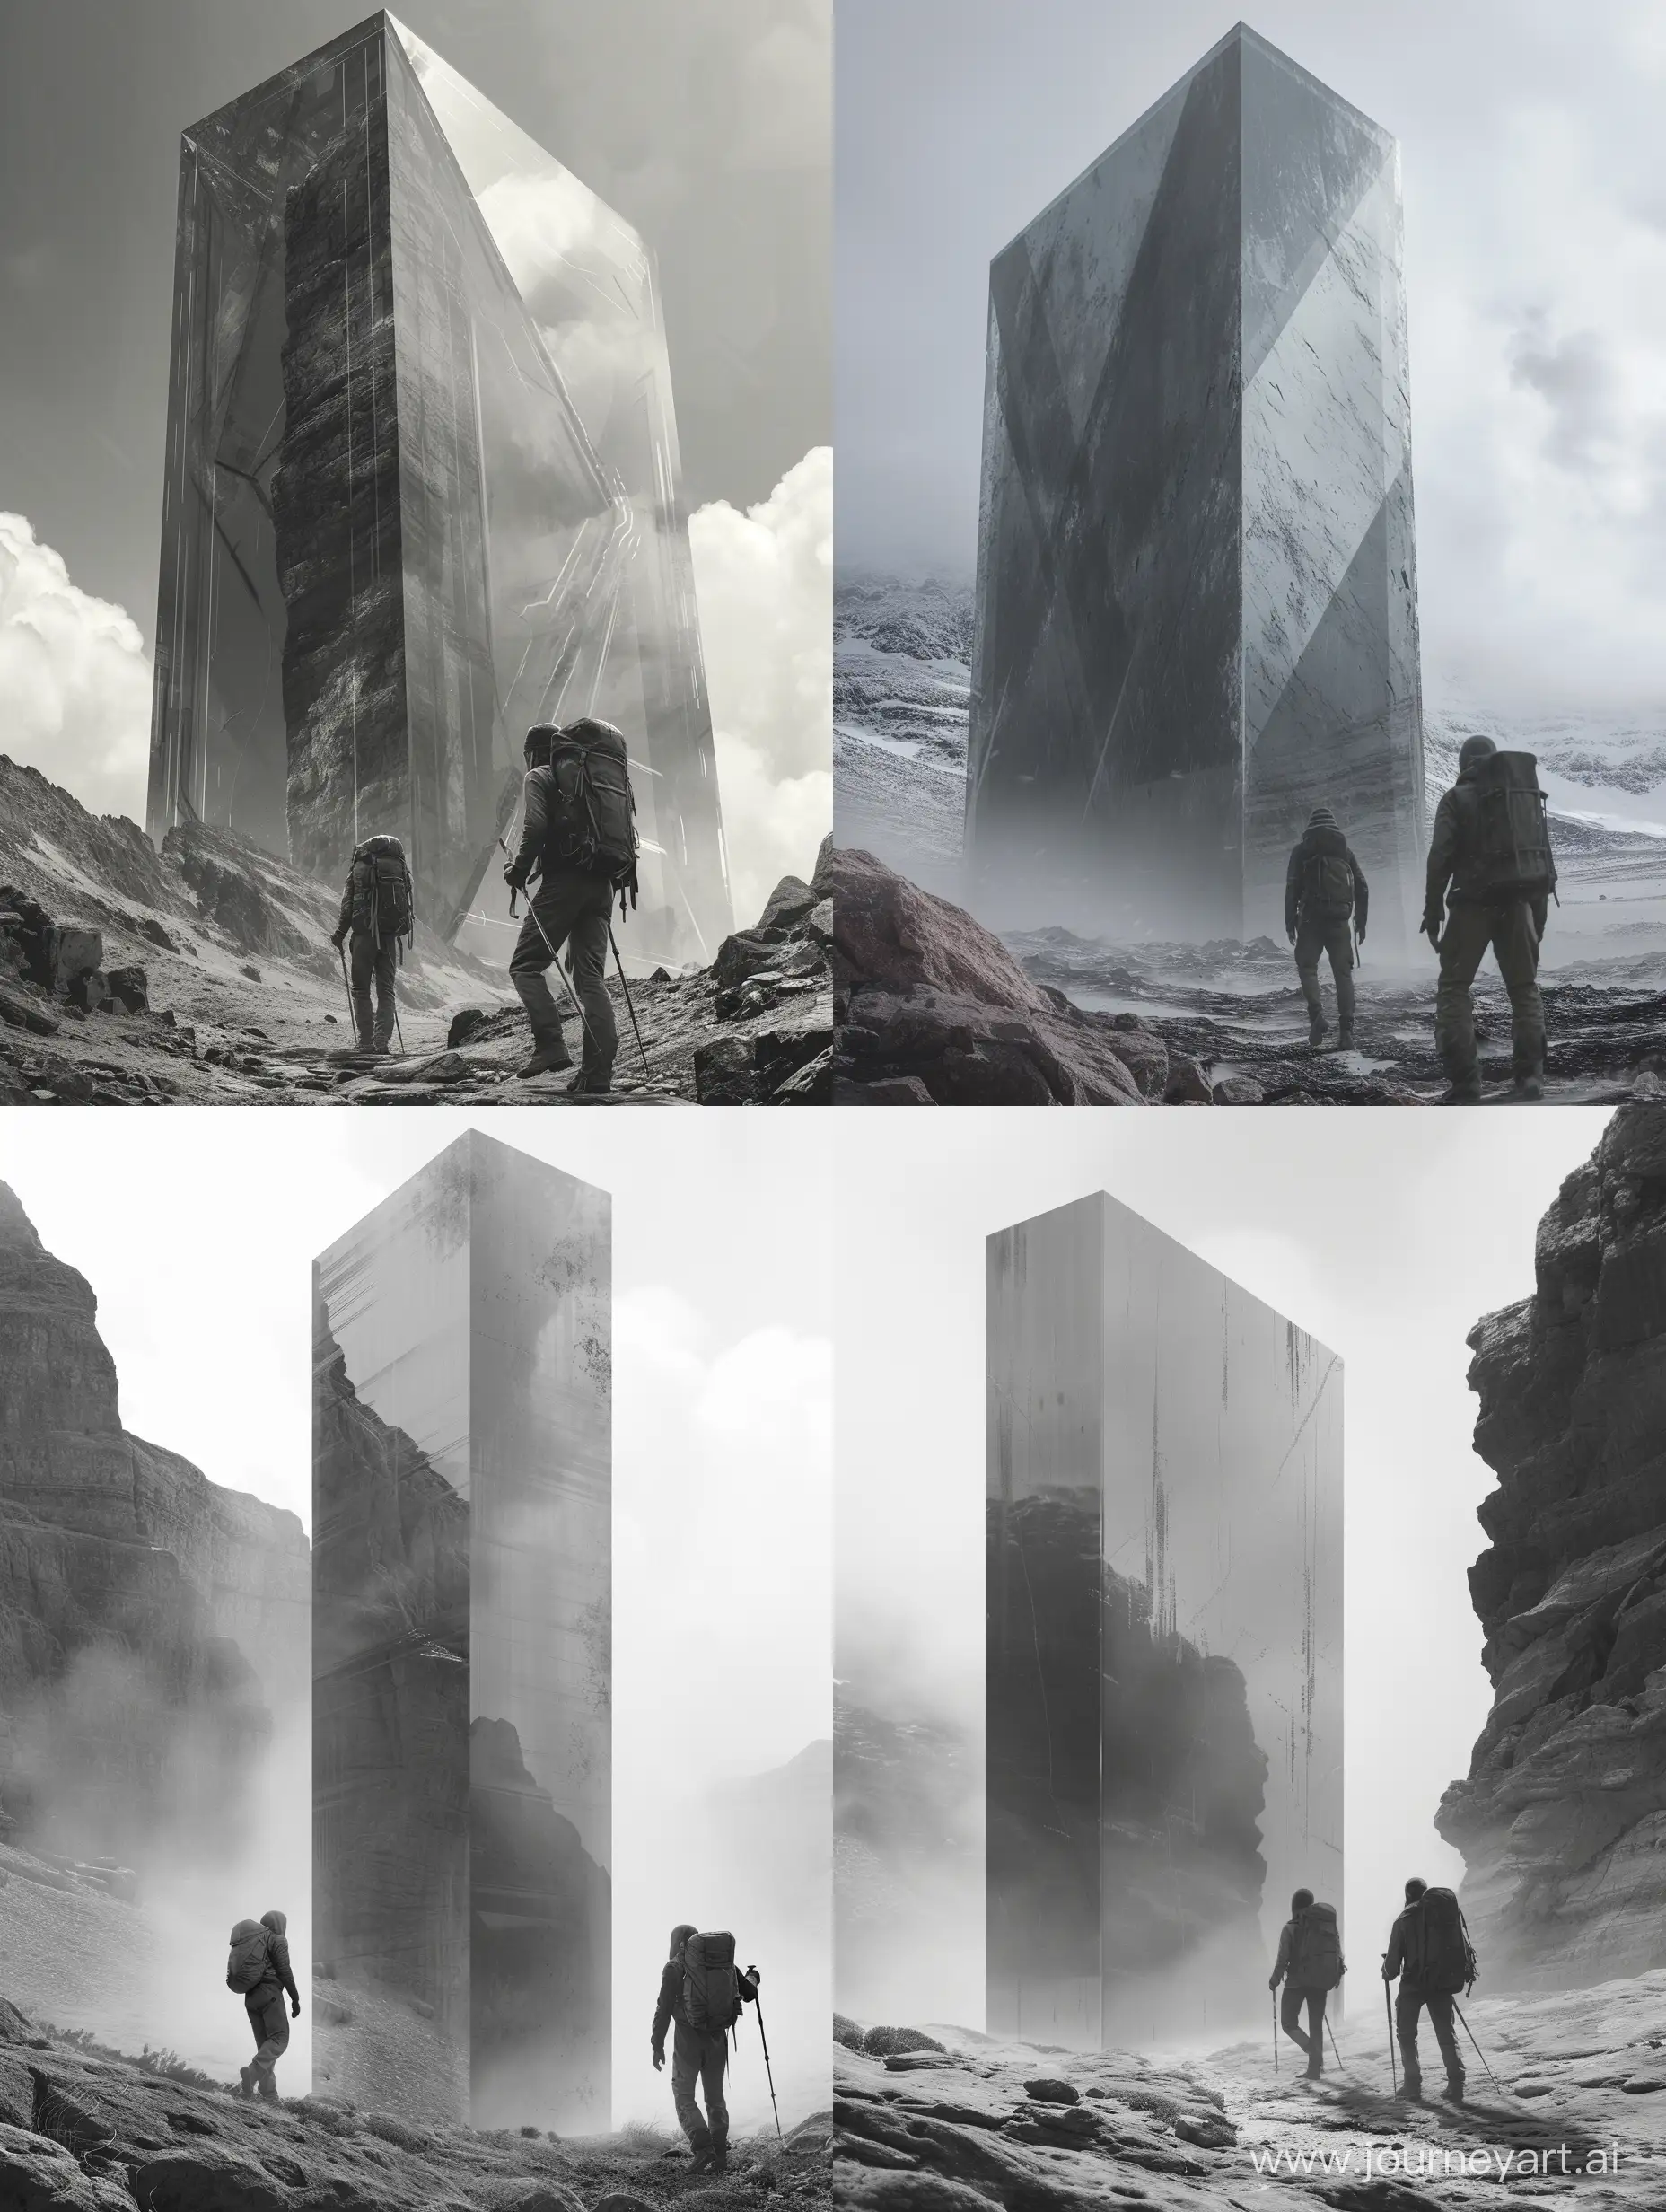 Enormous-Glass-Monolith-Epic-Encounter-of-Hikers-on-a-Grand-Scale